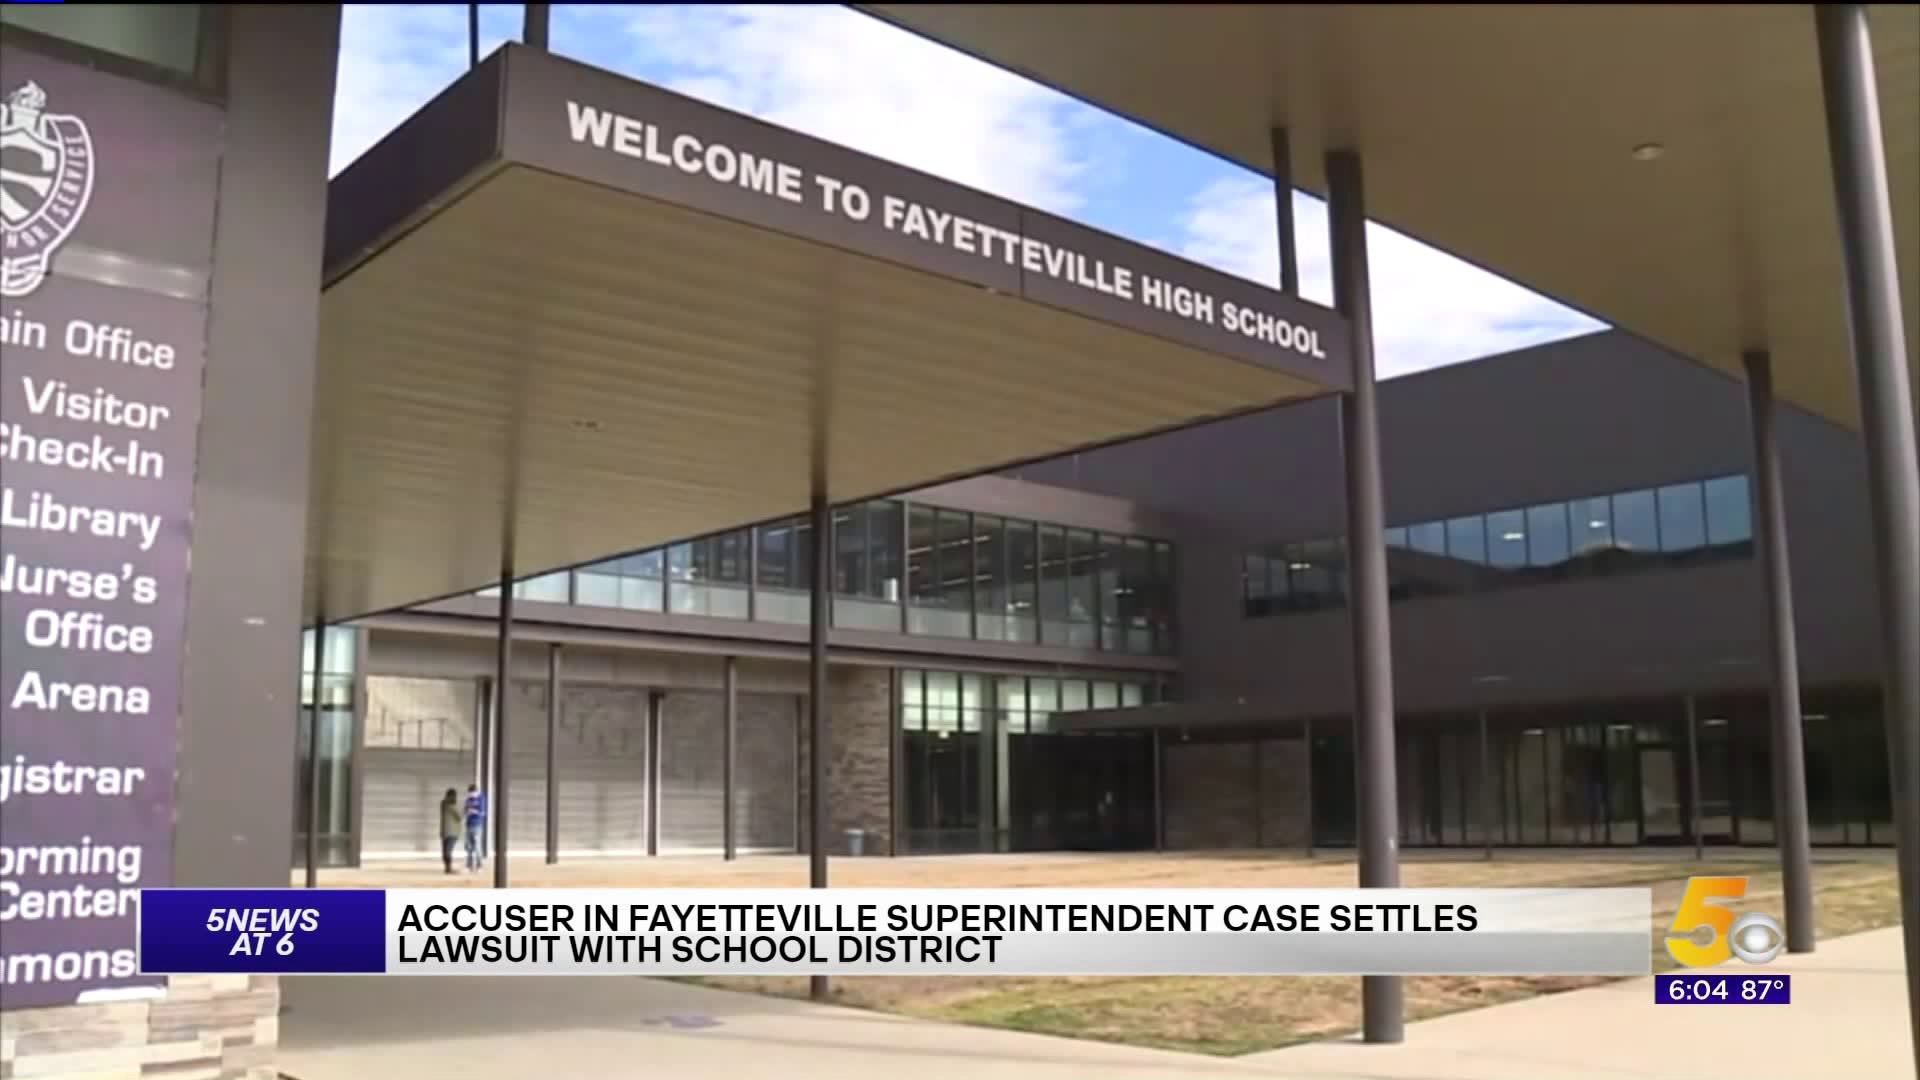 Accuser In Fayetteville Superintendent Case Settles Lawsuit With School District